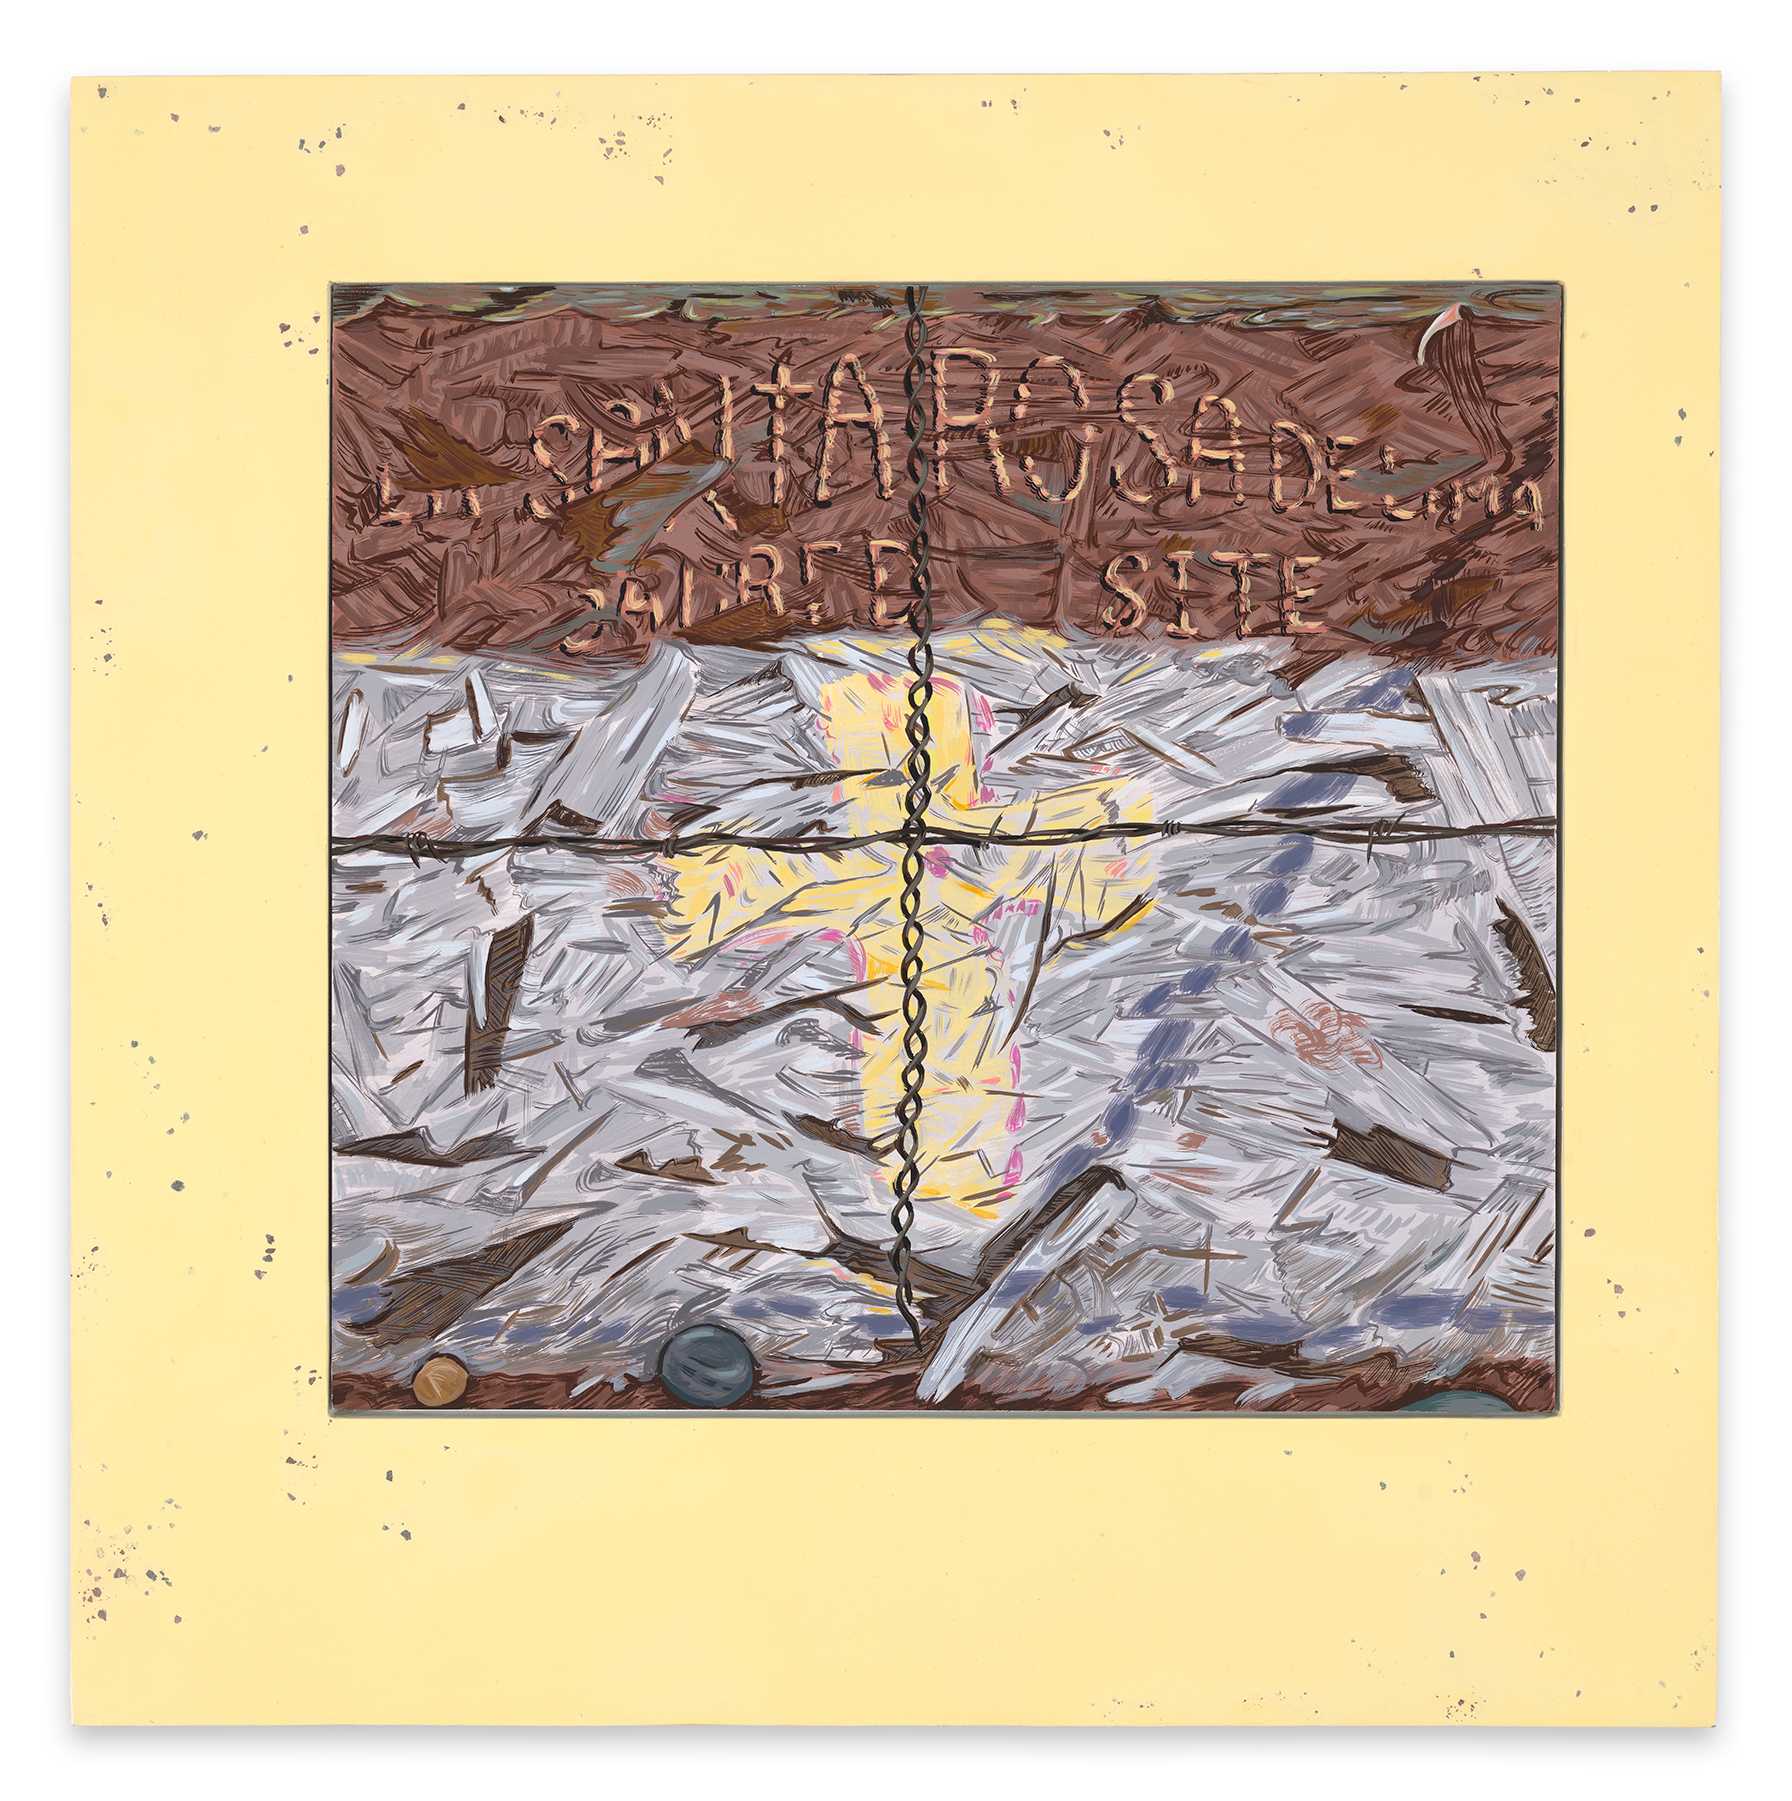 This image shows a painting which is framed in a pigmented pastel yellow panel that includes fragments of earth and rocks from the sites where the paintings were made. The painting memorializes a wooden painted sign from an abandoned church near the town of Abiquiu.  The top 1/3 of the painting consists of a register of brown-beige swatches of paint with darker brown hashmarks and squiggly lines revealing sections of peeling paint. The words, La Santa Rosa De Lima are written in an arc across the top, in large yellow letters in curled quick short yellow and brown strokes, with the words Scared Site painted in the same manner below. The bottom 2/3rds of painting consists of a field of white peeling paint, composed of gray hash marks, linear marks and pinky-brown scribbles showing abrasions and losses.  A wide blue line of hash marks dissects the painting diagonally from the bottom center to upper right corner.  In the center of the composition is a large yellow cross outlined in pink hash marks. Superimposed, like a cross, over the entire image is a vertical metal linked chain and a horizonal piece of barbed wire.  The sign appears to be propped up on the dirt as there are 3 stones on the bottom of the picture plane, a small yellowish one to the left and to the right a medium size blueish-gray stone and another one partially visible in the right-hand corner.